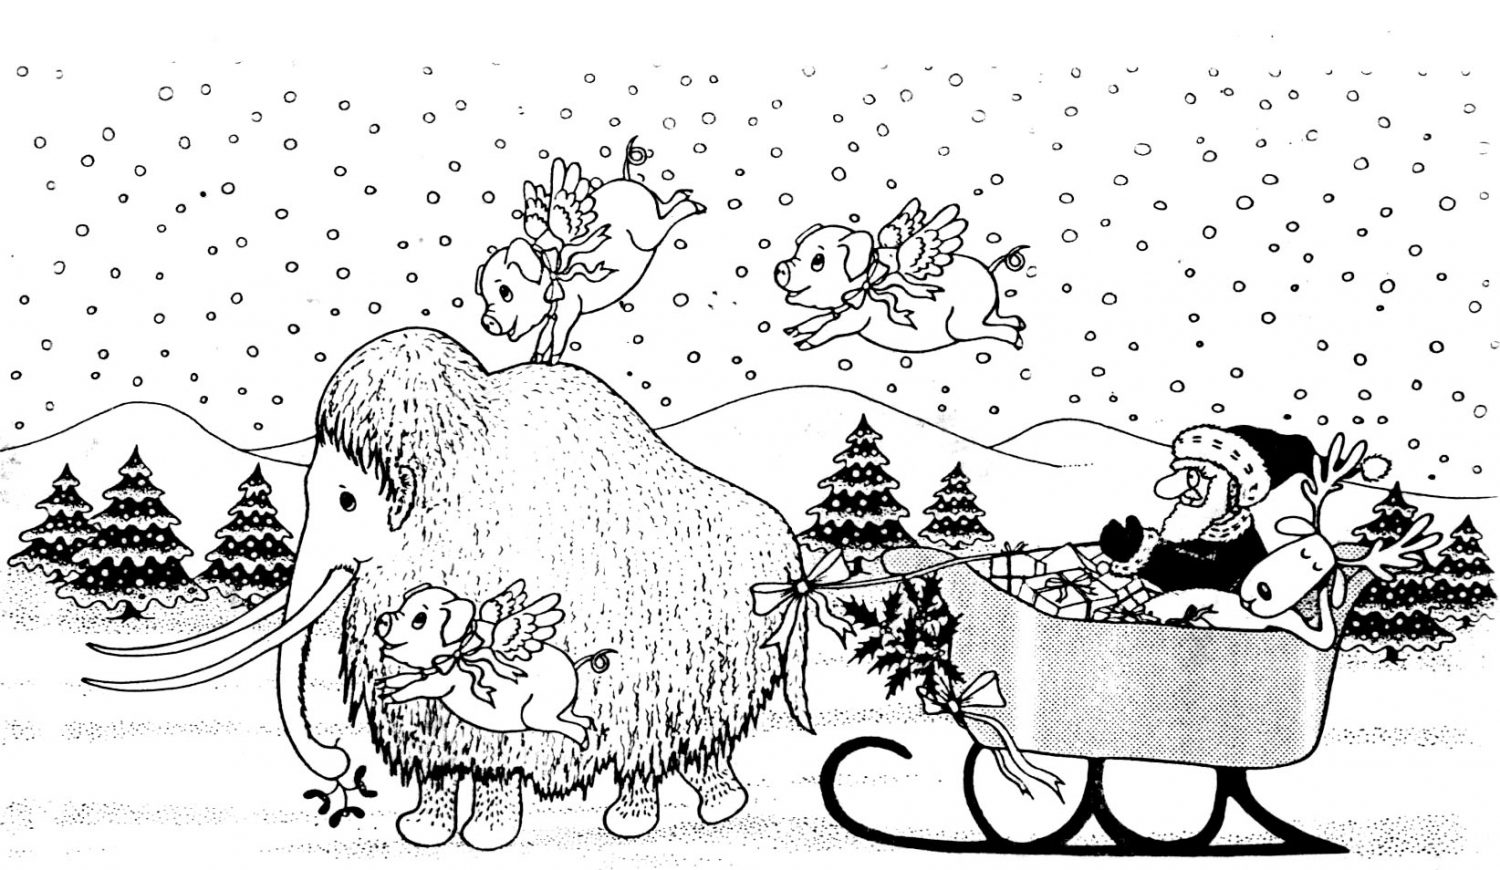 Mammoth pulling Father Christmas' sleigh